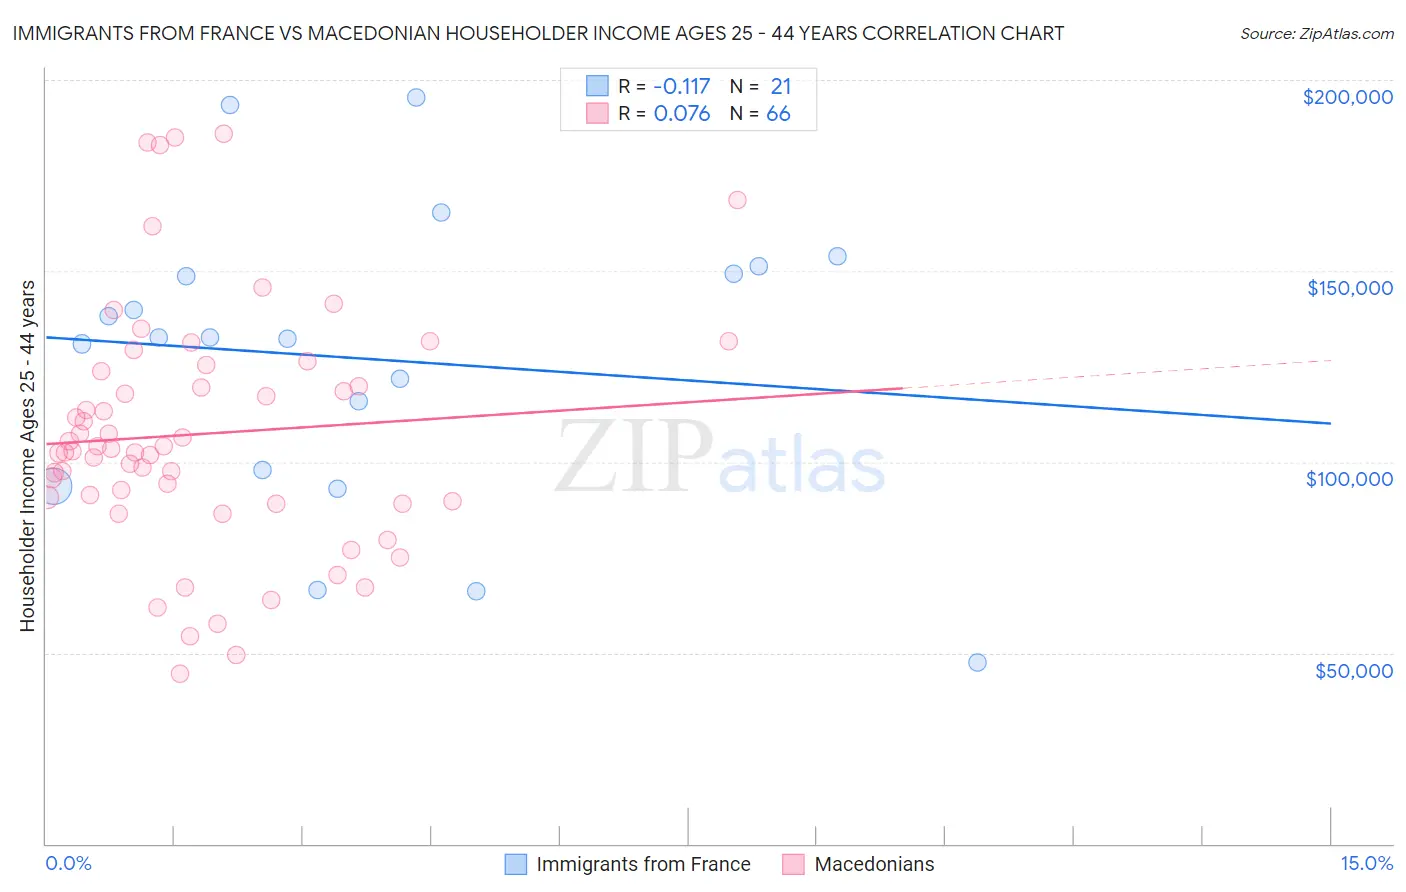 Immigrants from France vs Macedonian Householder Income Ages 25 - 44 years